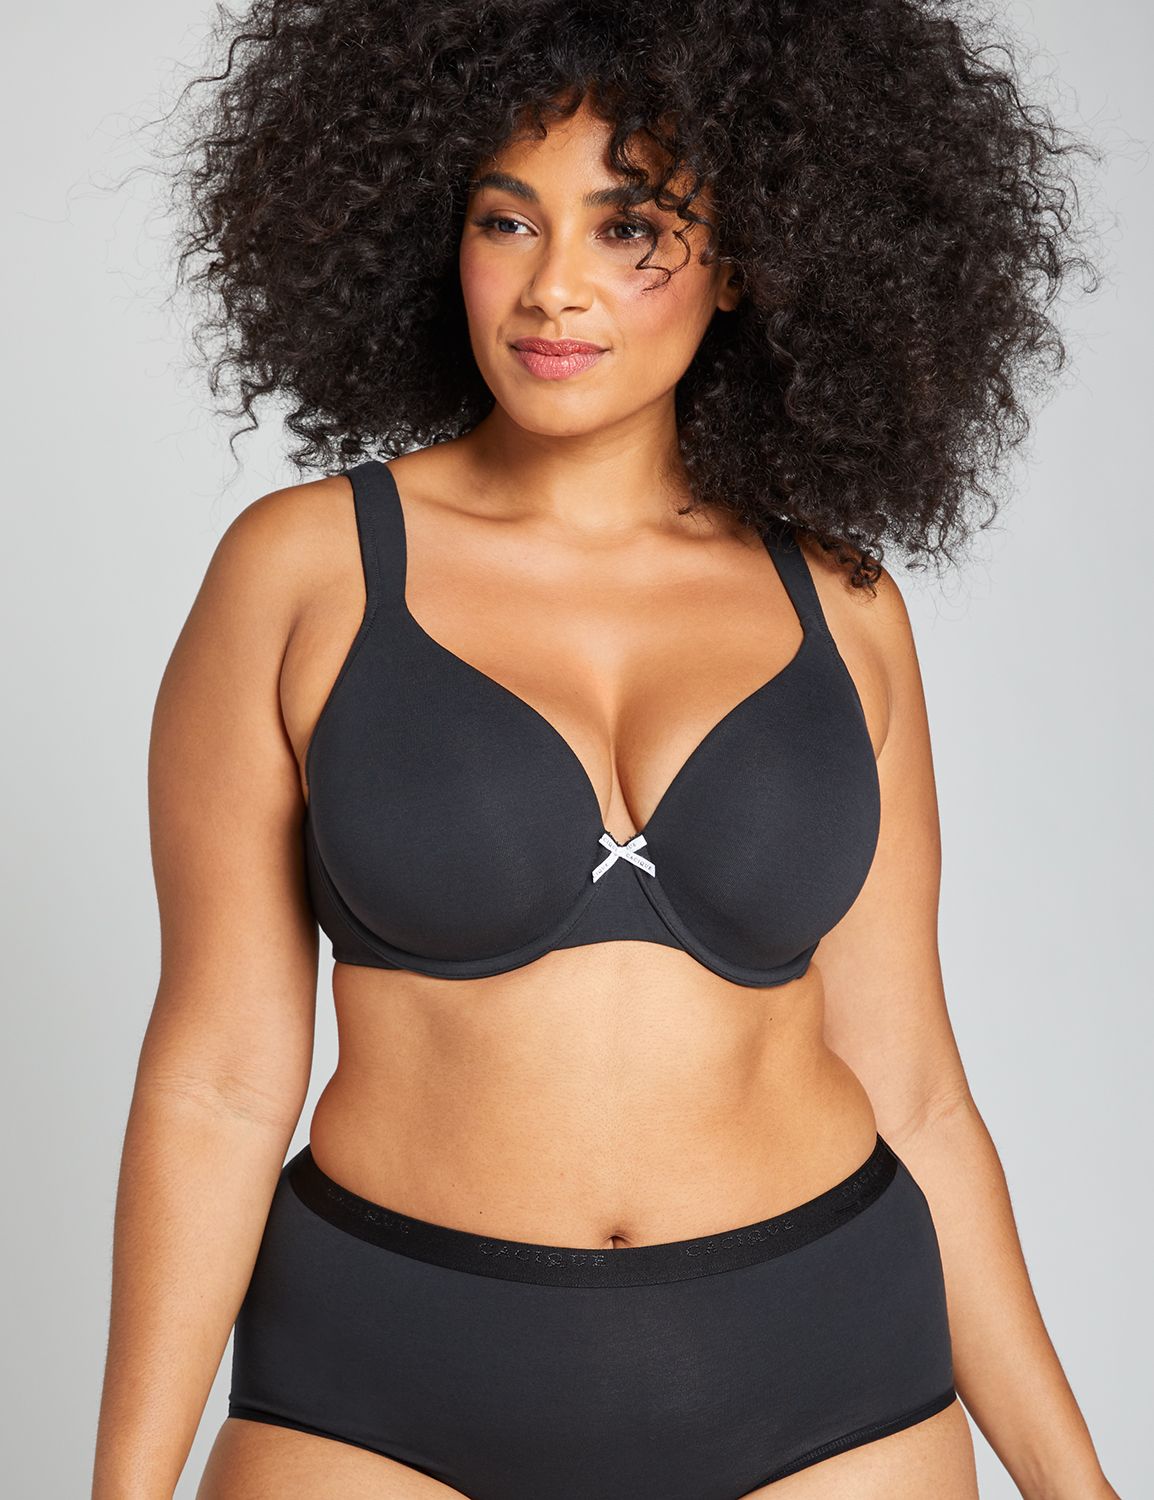 Cacique Lightly Lined Lounge Black Wireless Bra 50DDD Size undefined - $26  New With Tags - From Tara